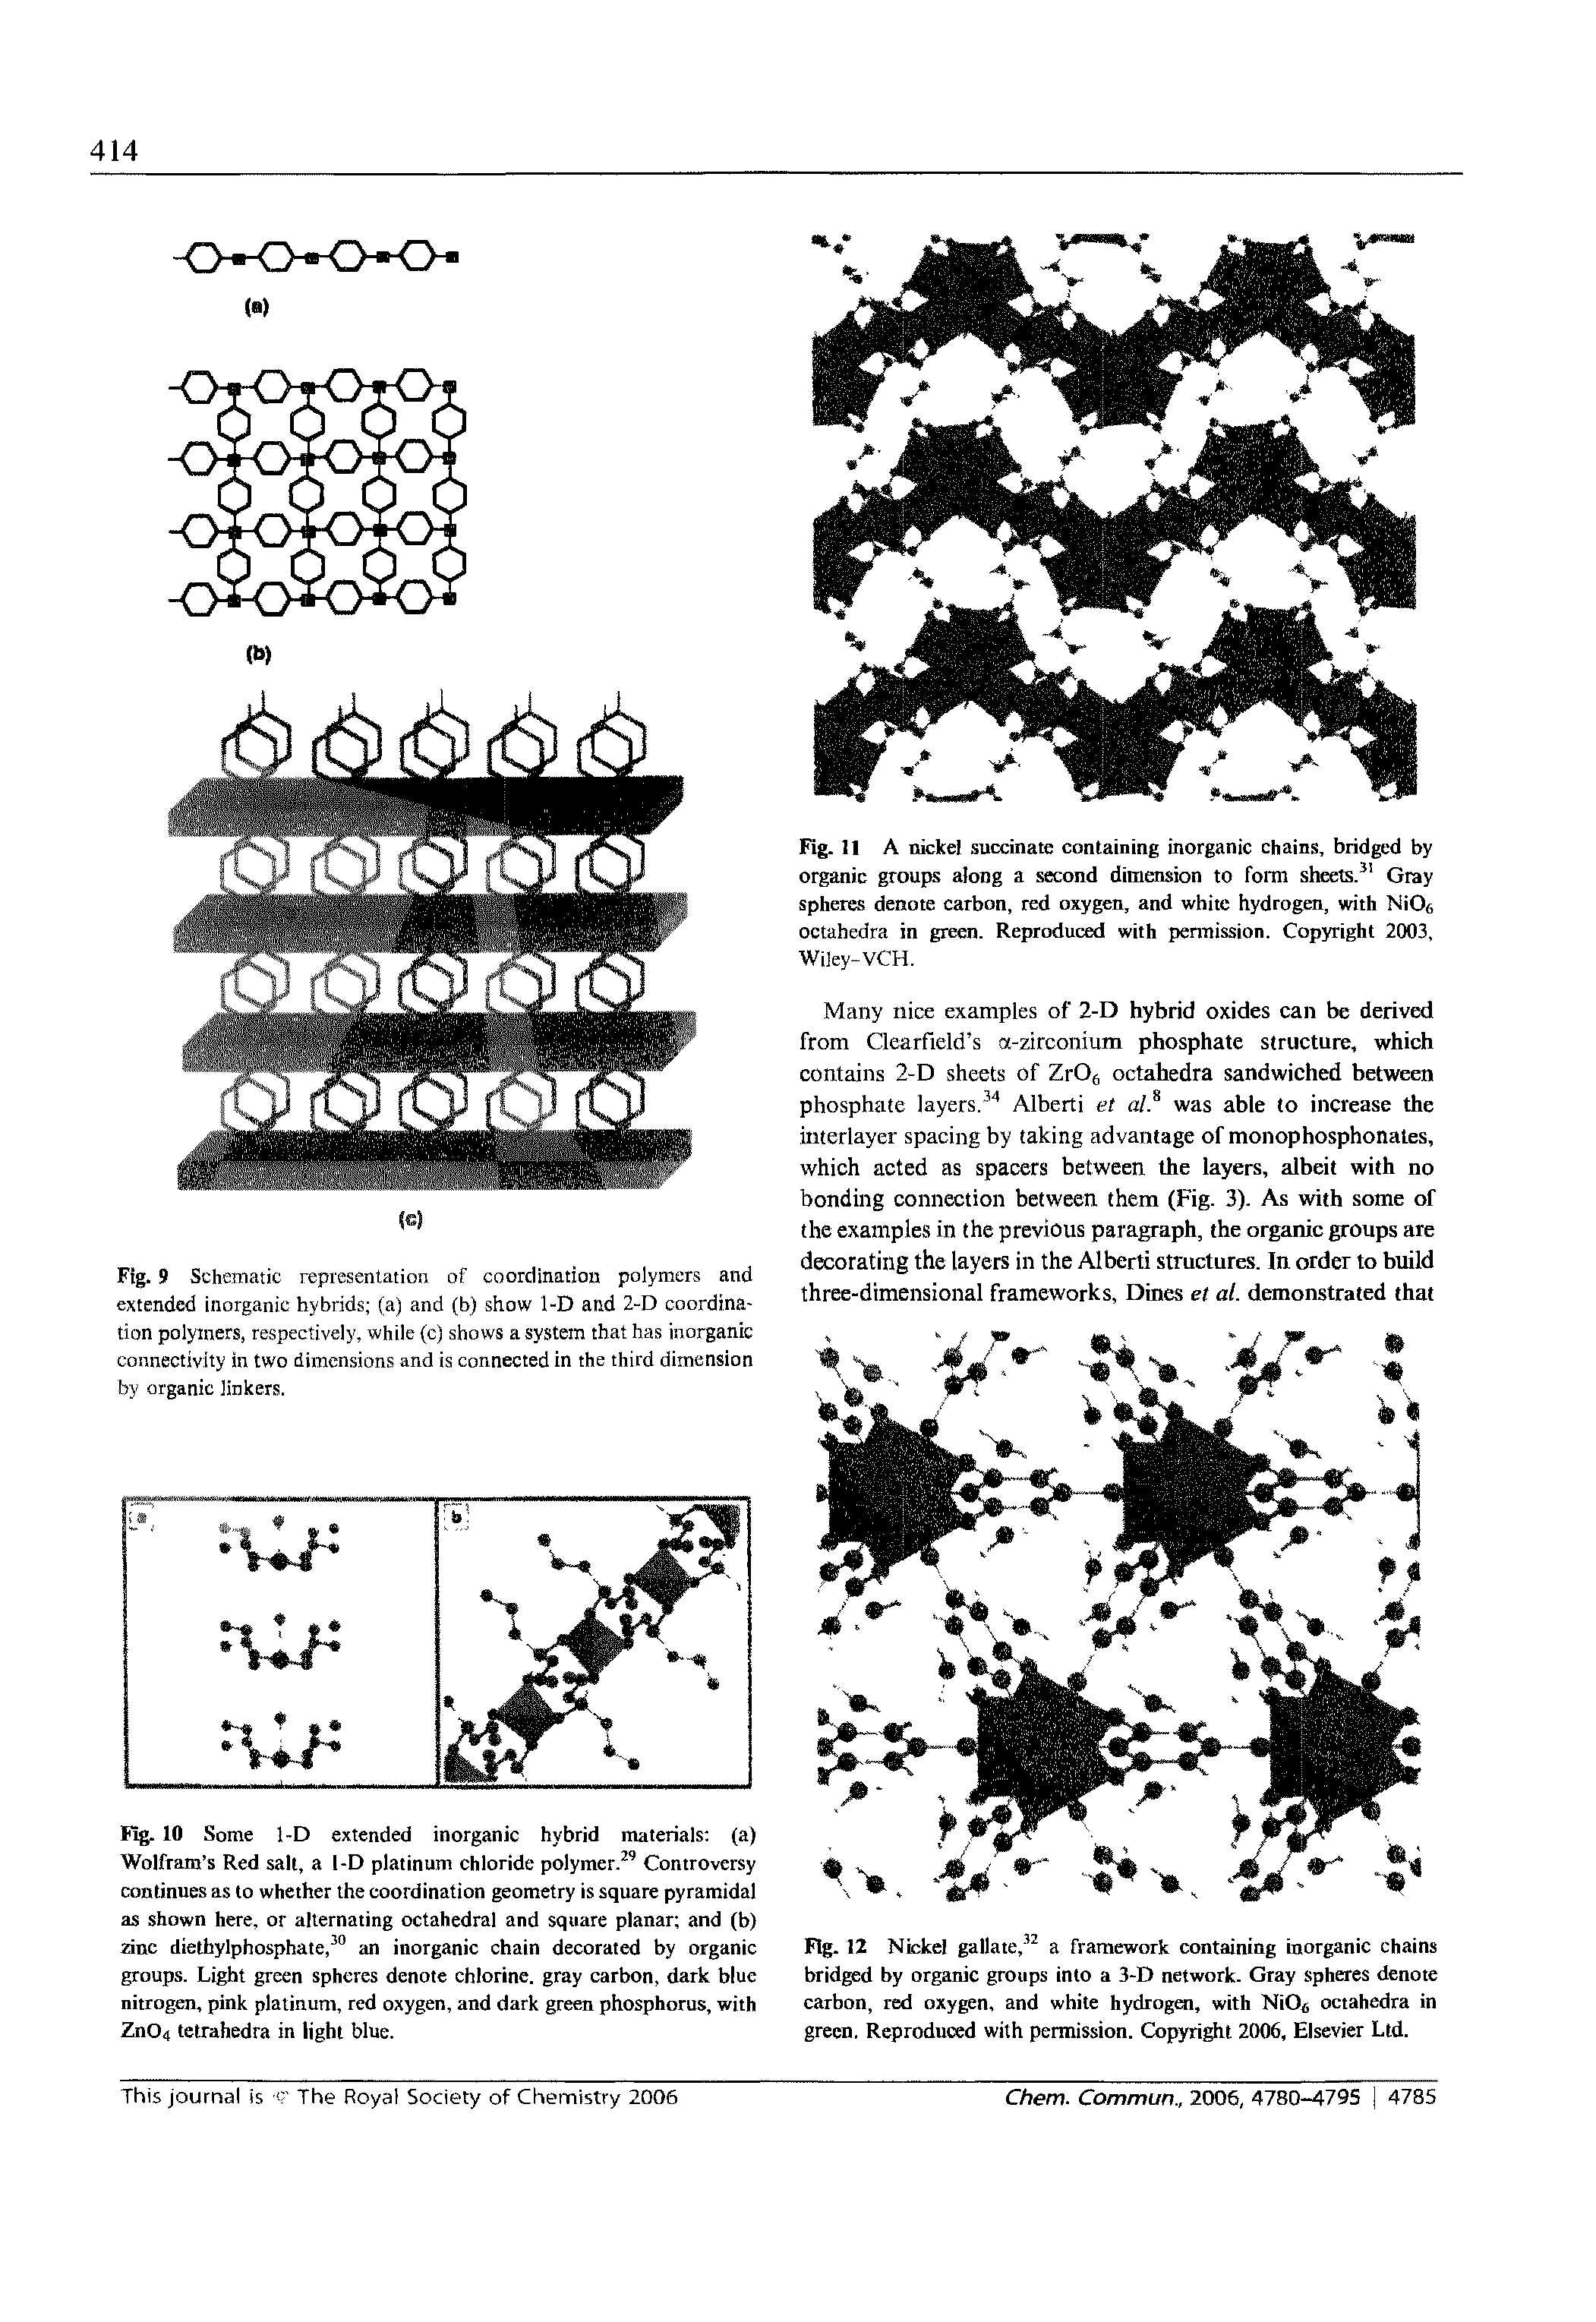 Fig. 9 Schematic representation of coordination polymers and extended inorganic hybrids (a) and (b) show 1-D and 2-D coordination polymers, respectively, while (c) shows a system that has inorganic connectivity in two dimensions and is connected in the third dimension by organic linkers.